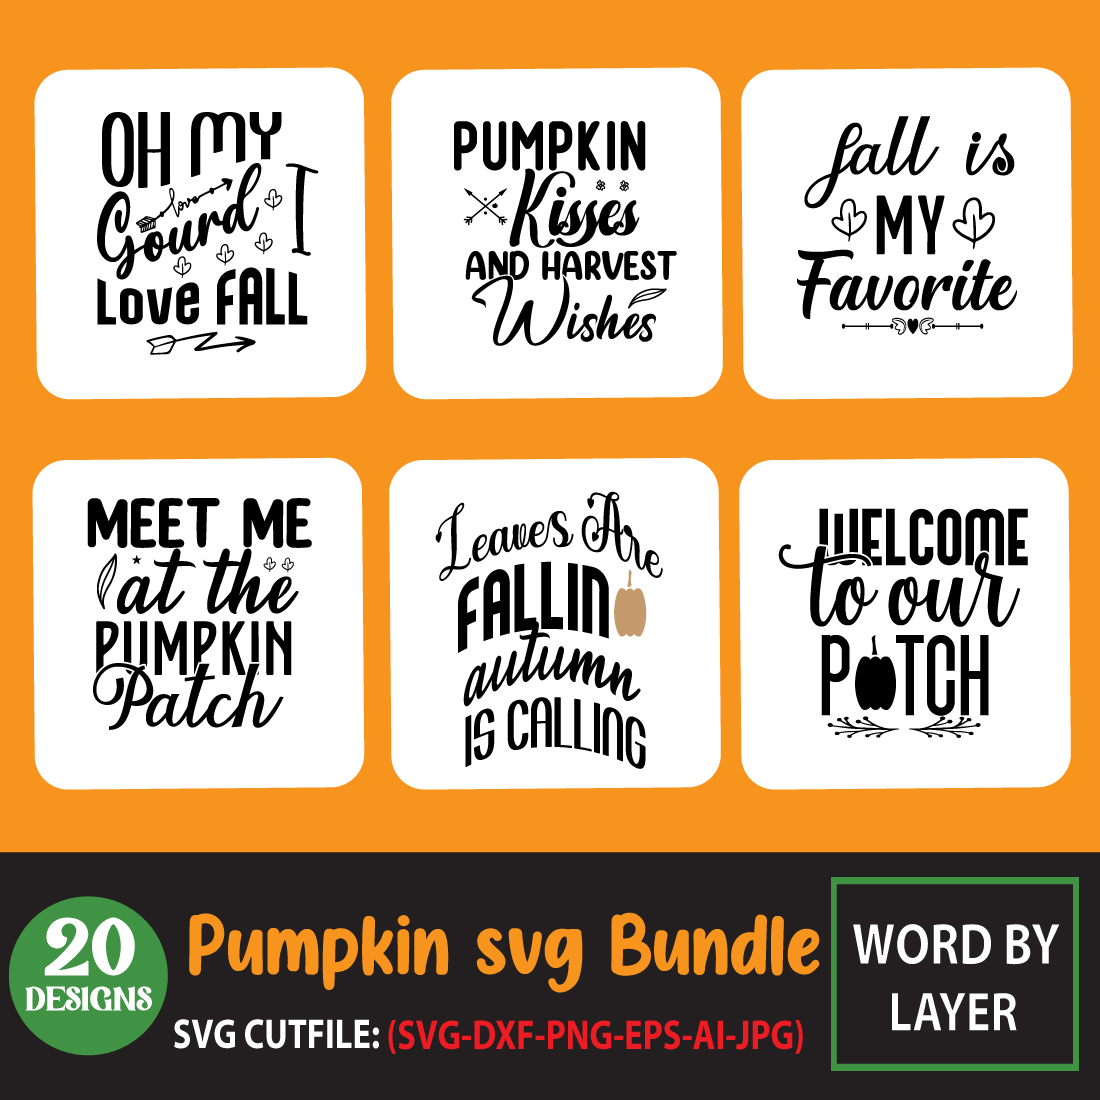 Bundle of enchanting images for prints on the theme of pumpkin